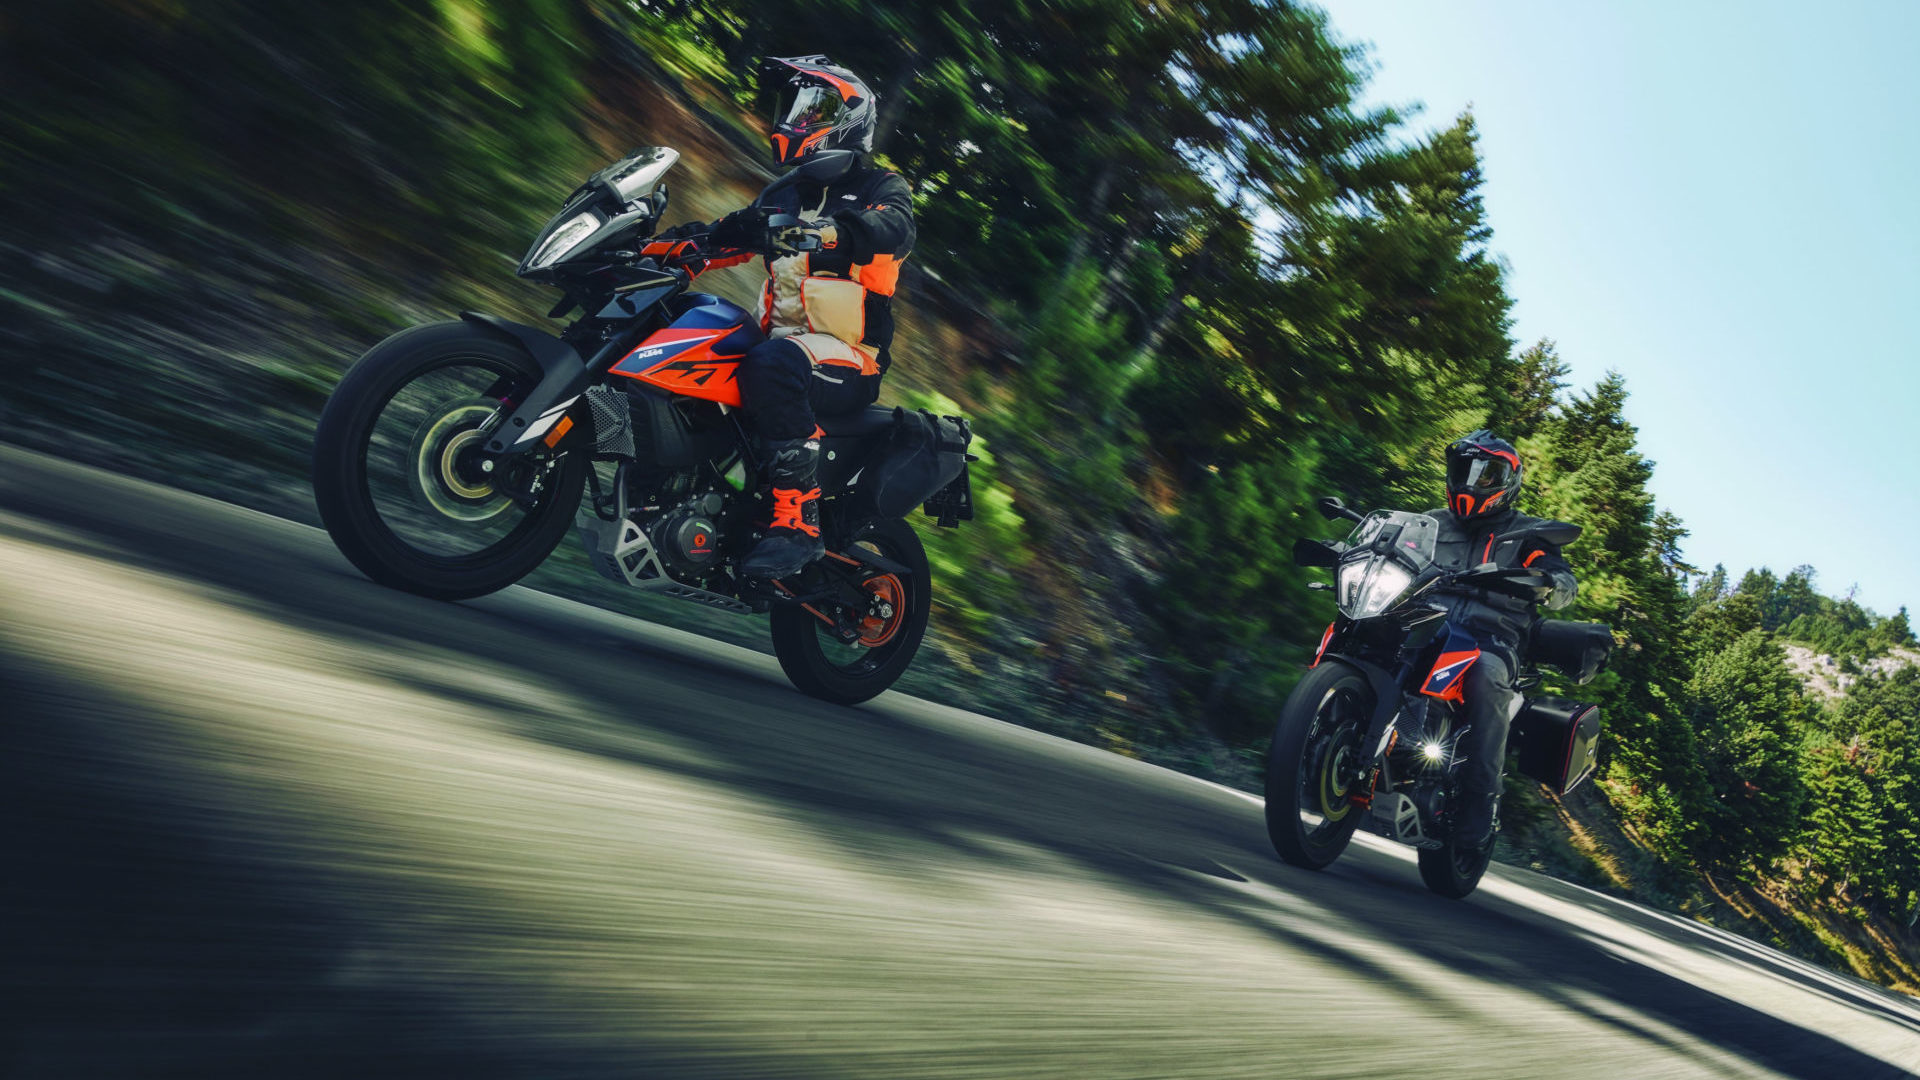 2022-model KTM 390 Adventure demo motorcycles will be available at selected events. Photo by @francescmonterophoto, courtesy KTM.